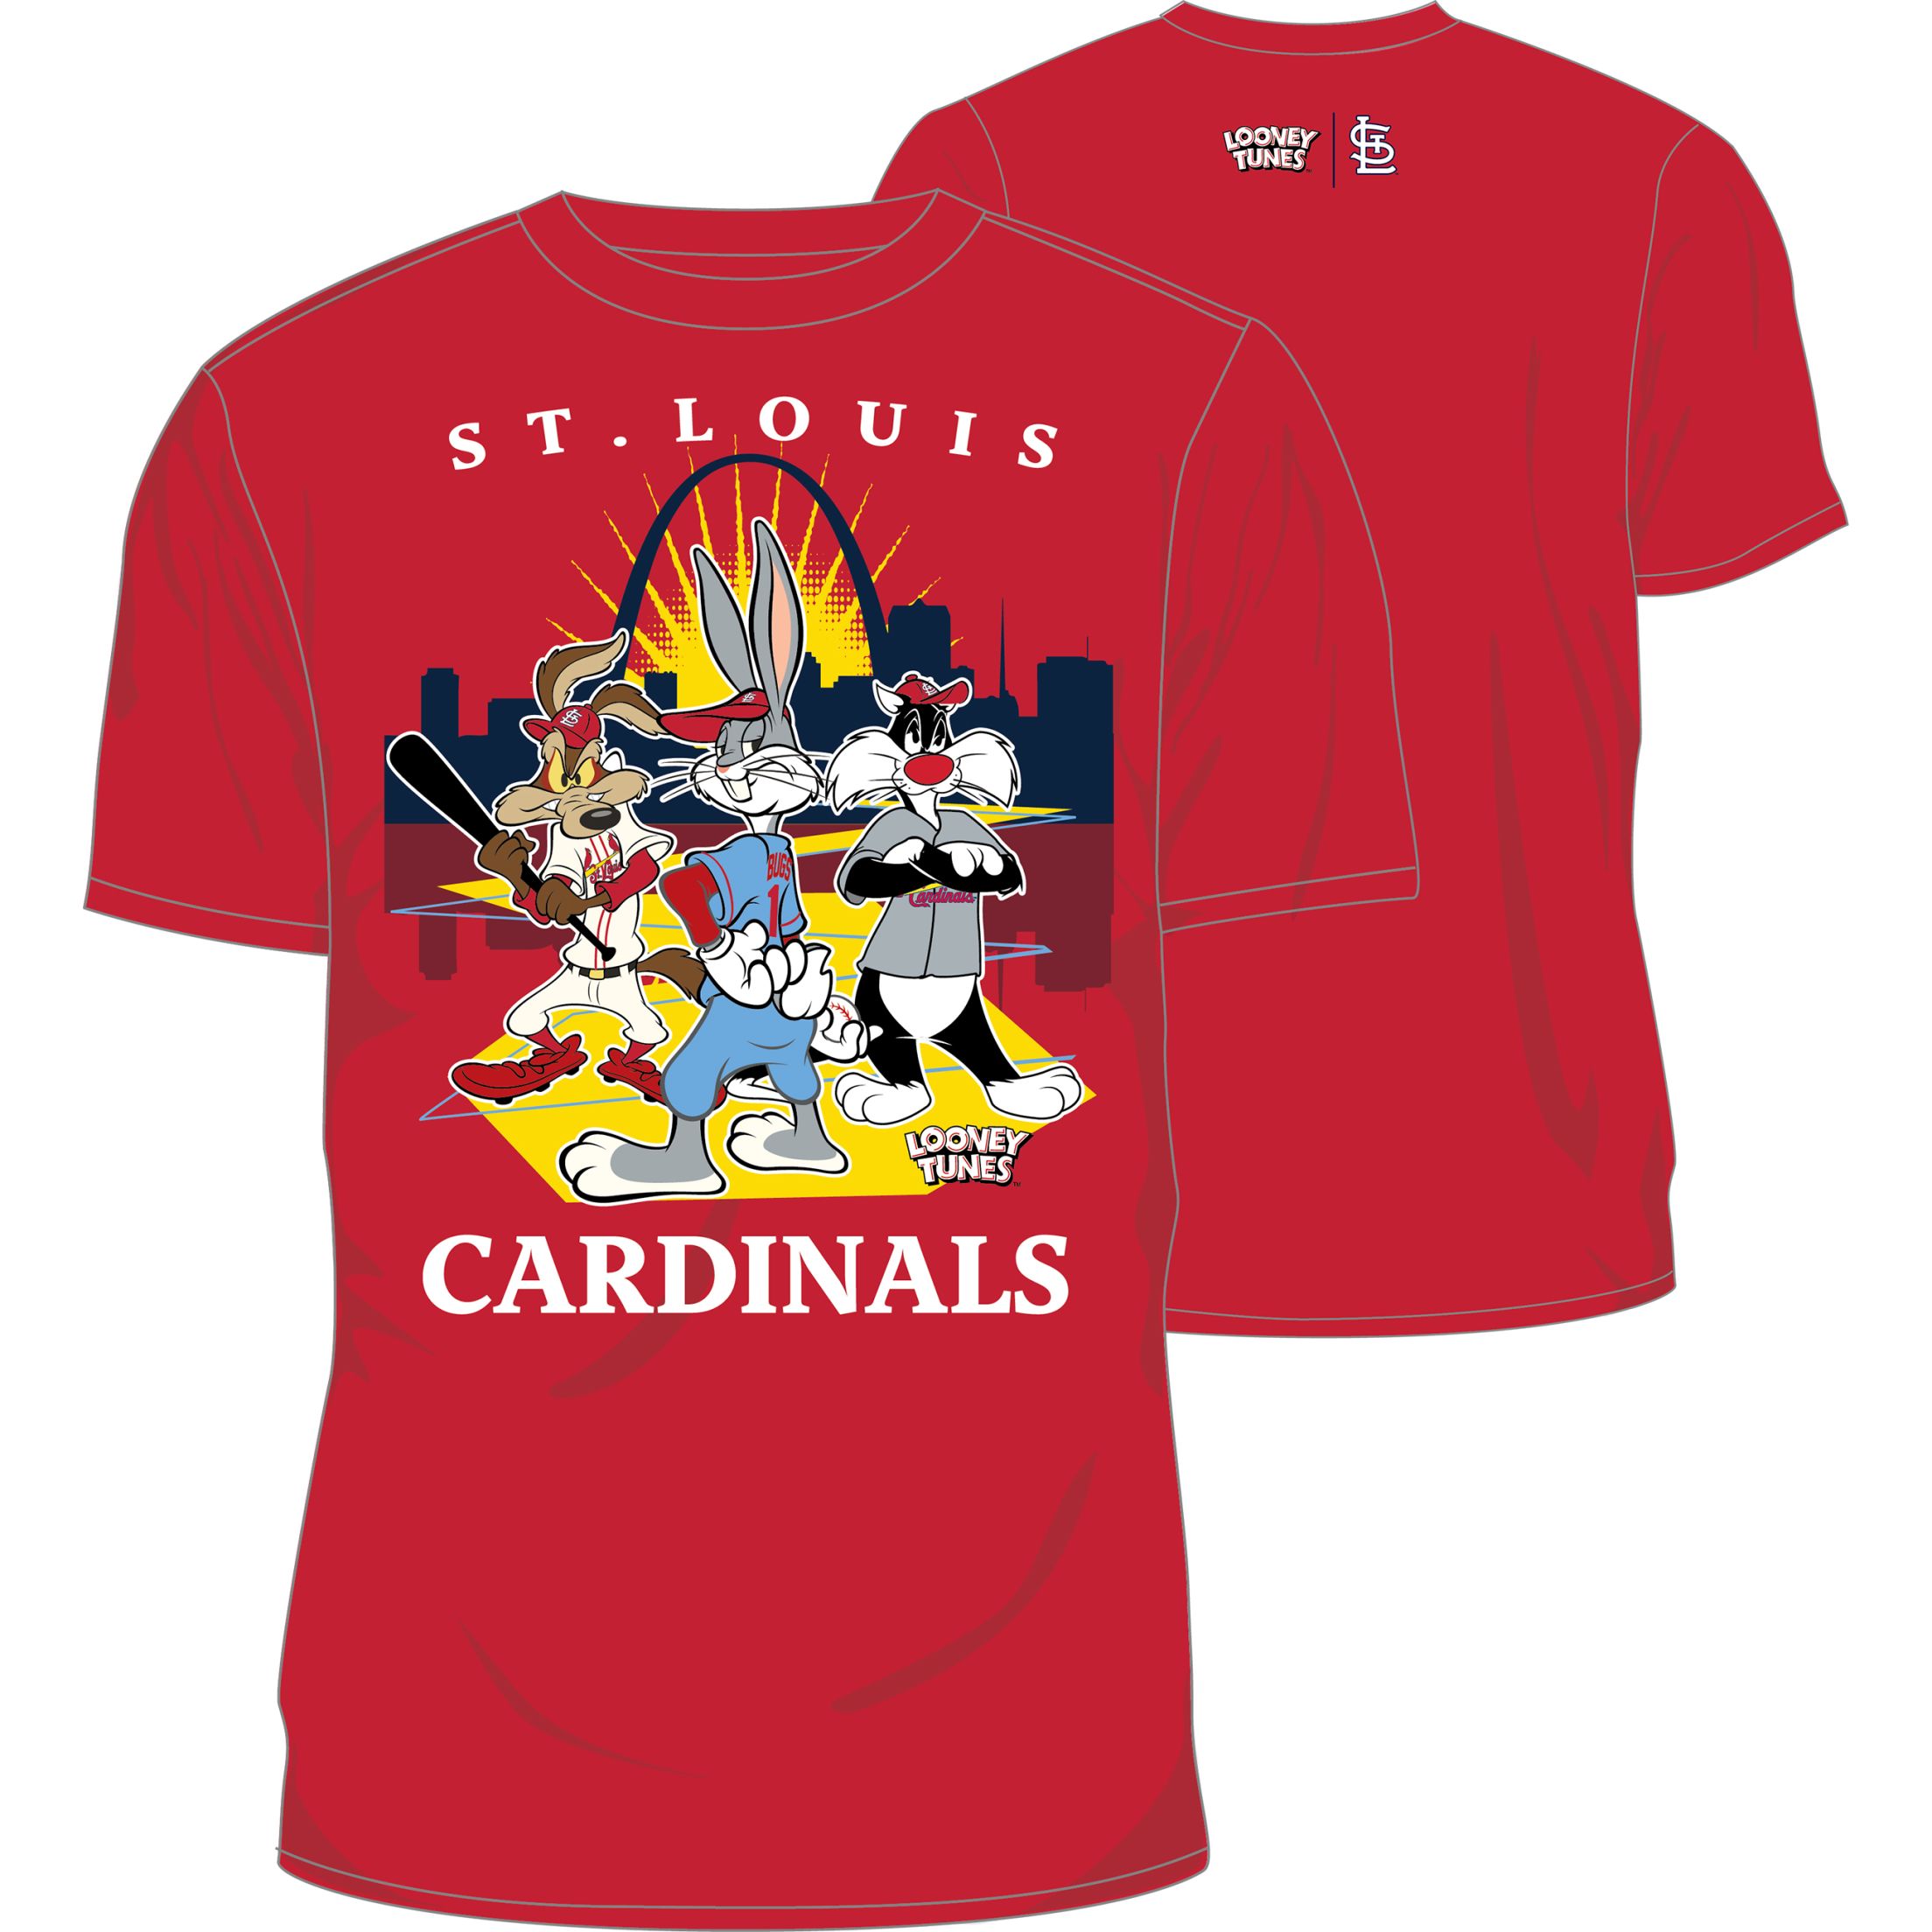 St. Louis Cardinals Steal Your Base Red Athletic T-Shirt